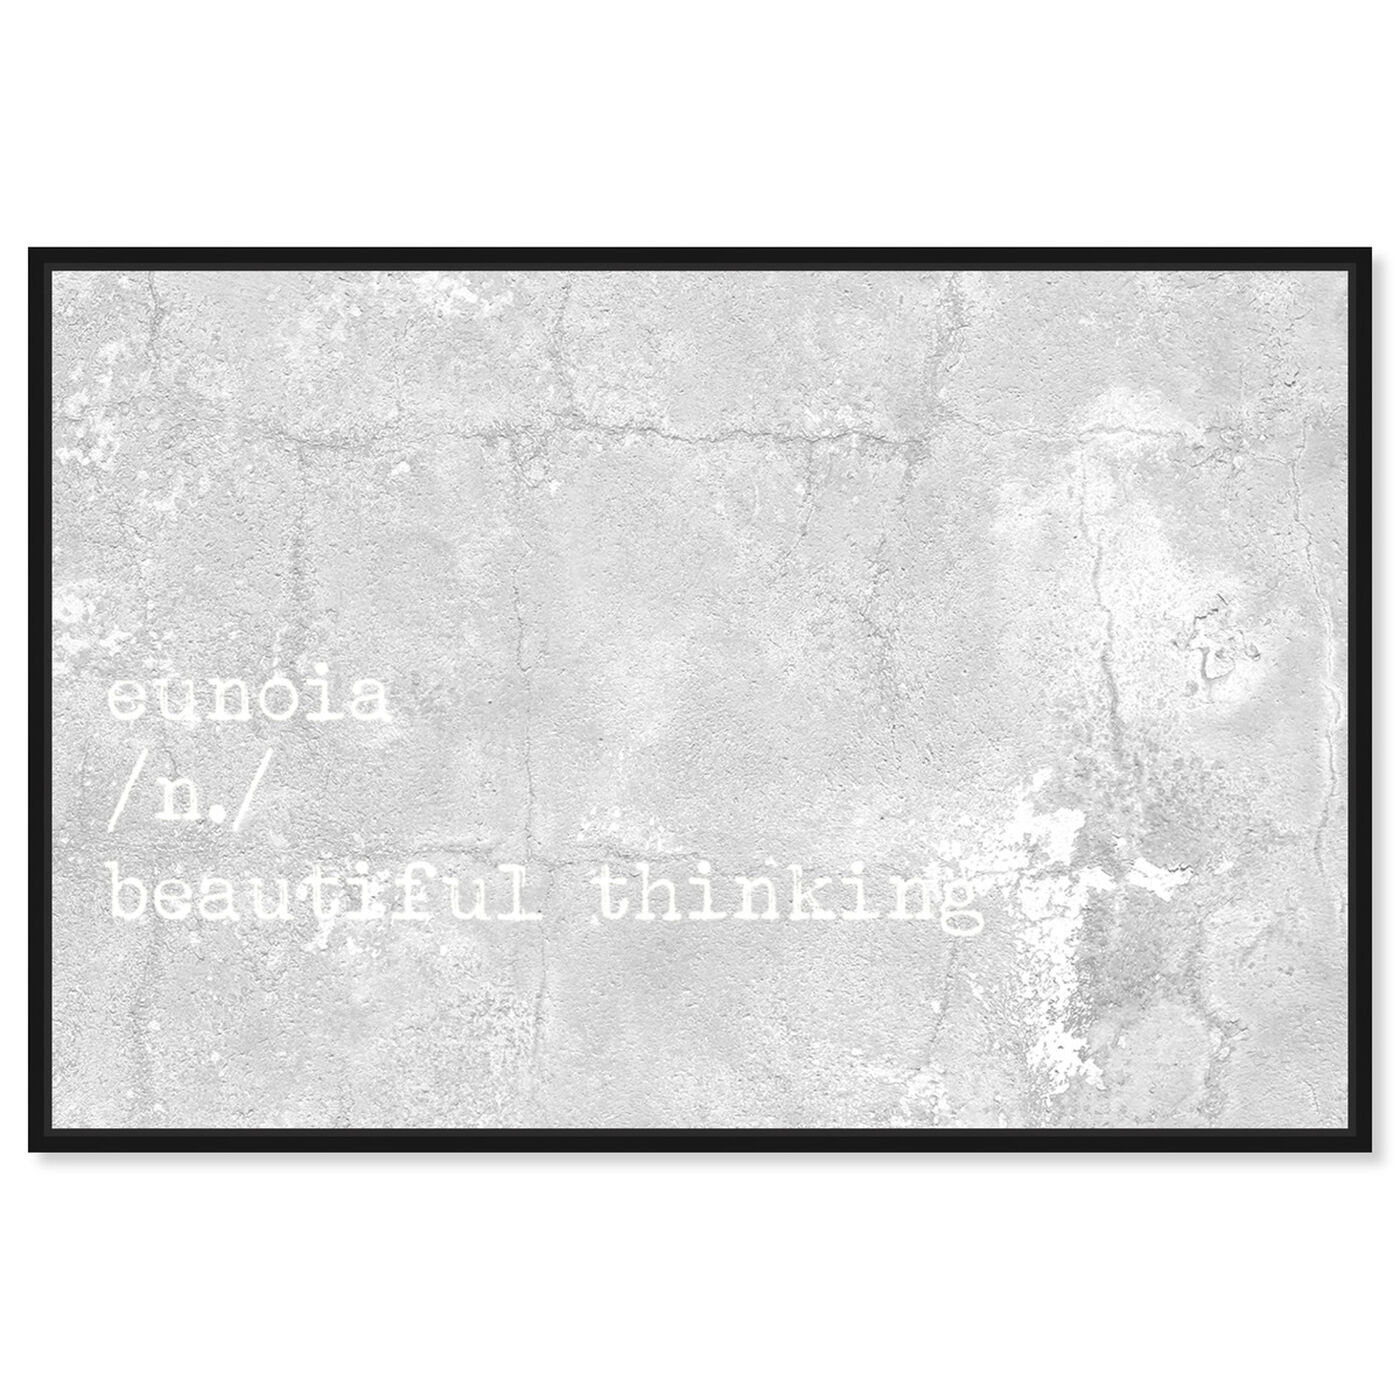 Front view of Beautiful Thinking featuring typography and quotes and beauty quotes and sayings art.